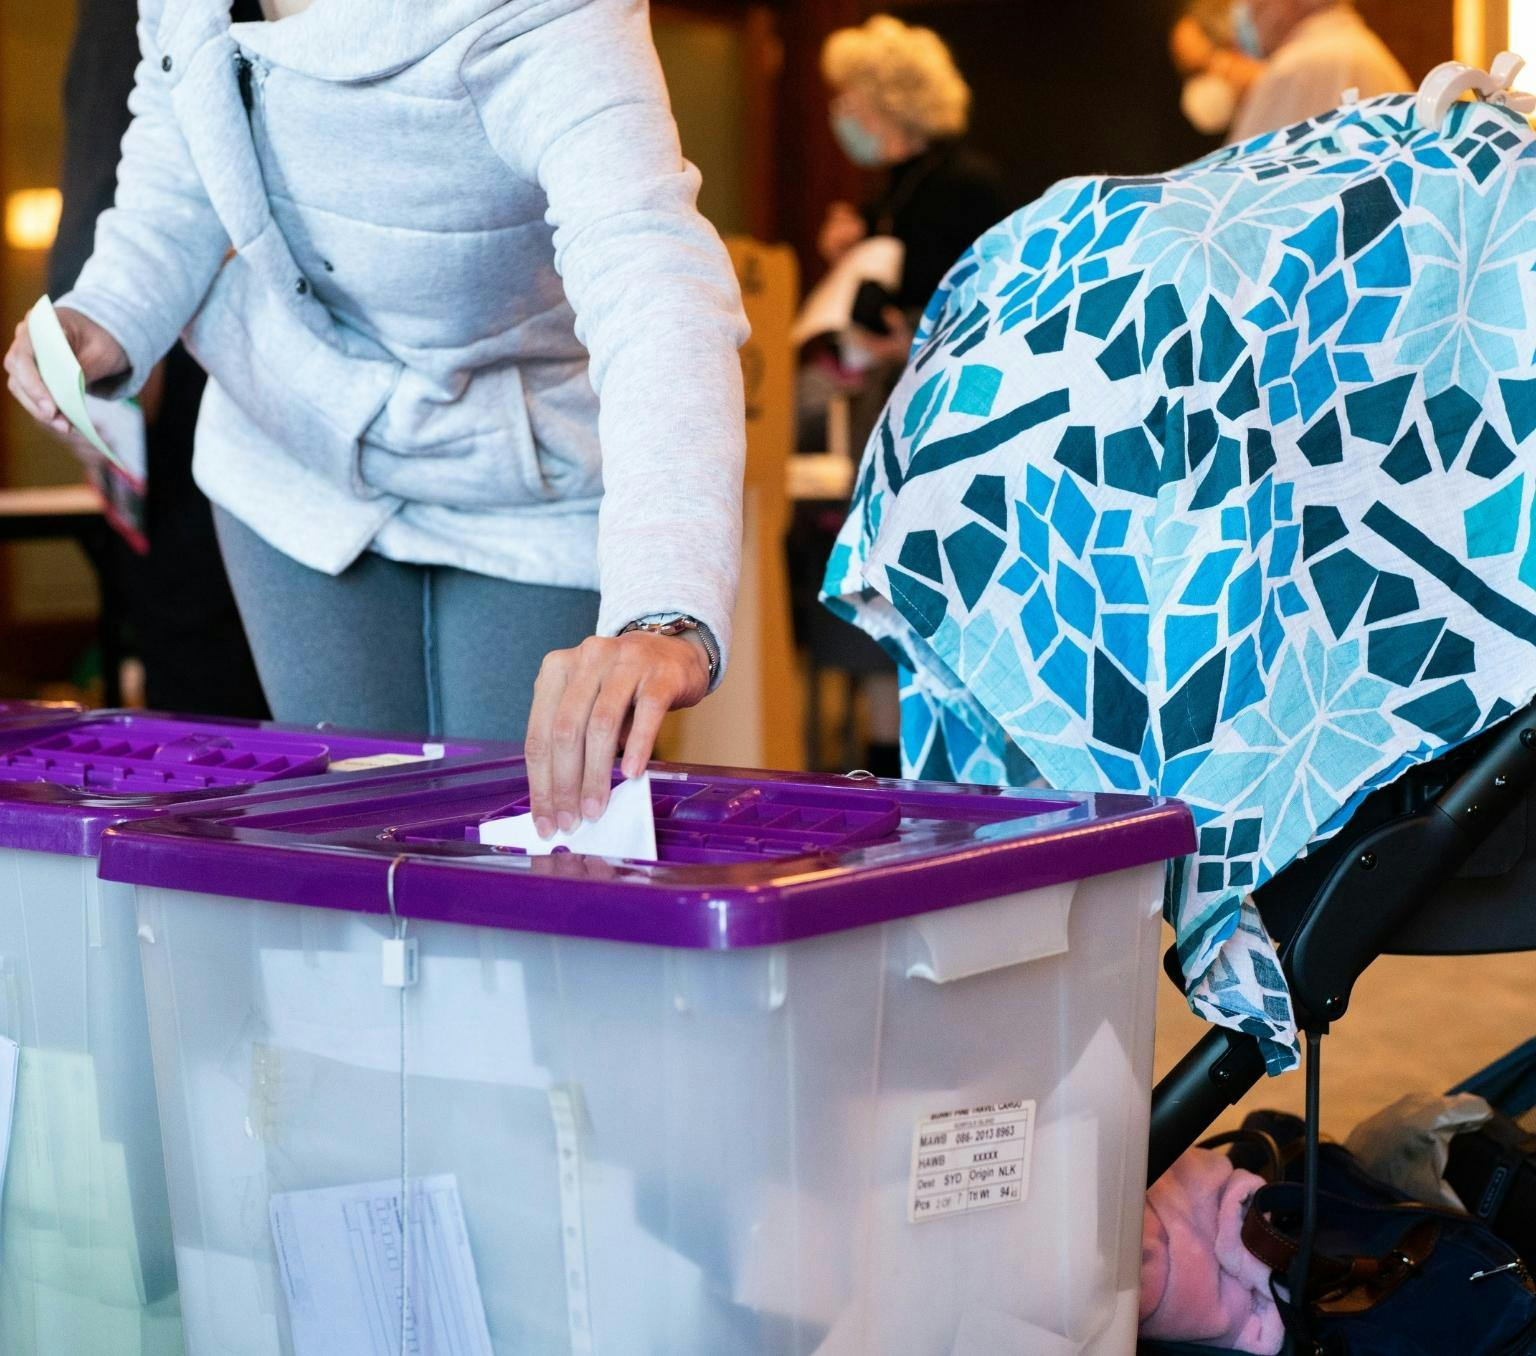 An unidentified female voter casting their vote in a ballot box at the 2022 Australian federal election. There is a baby pram next to the voter.